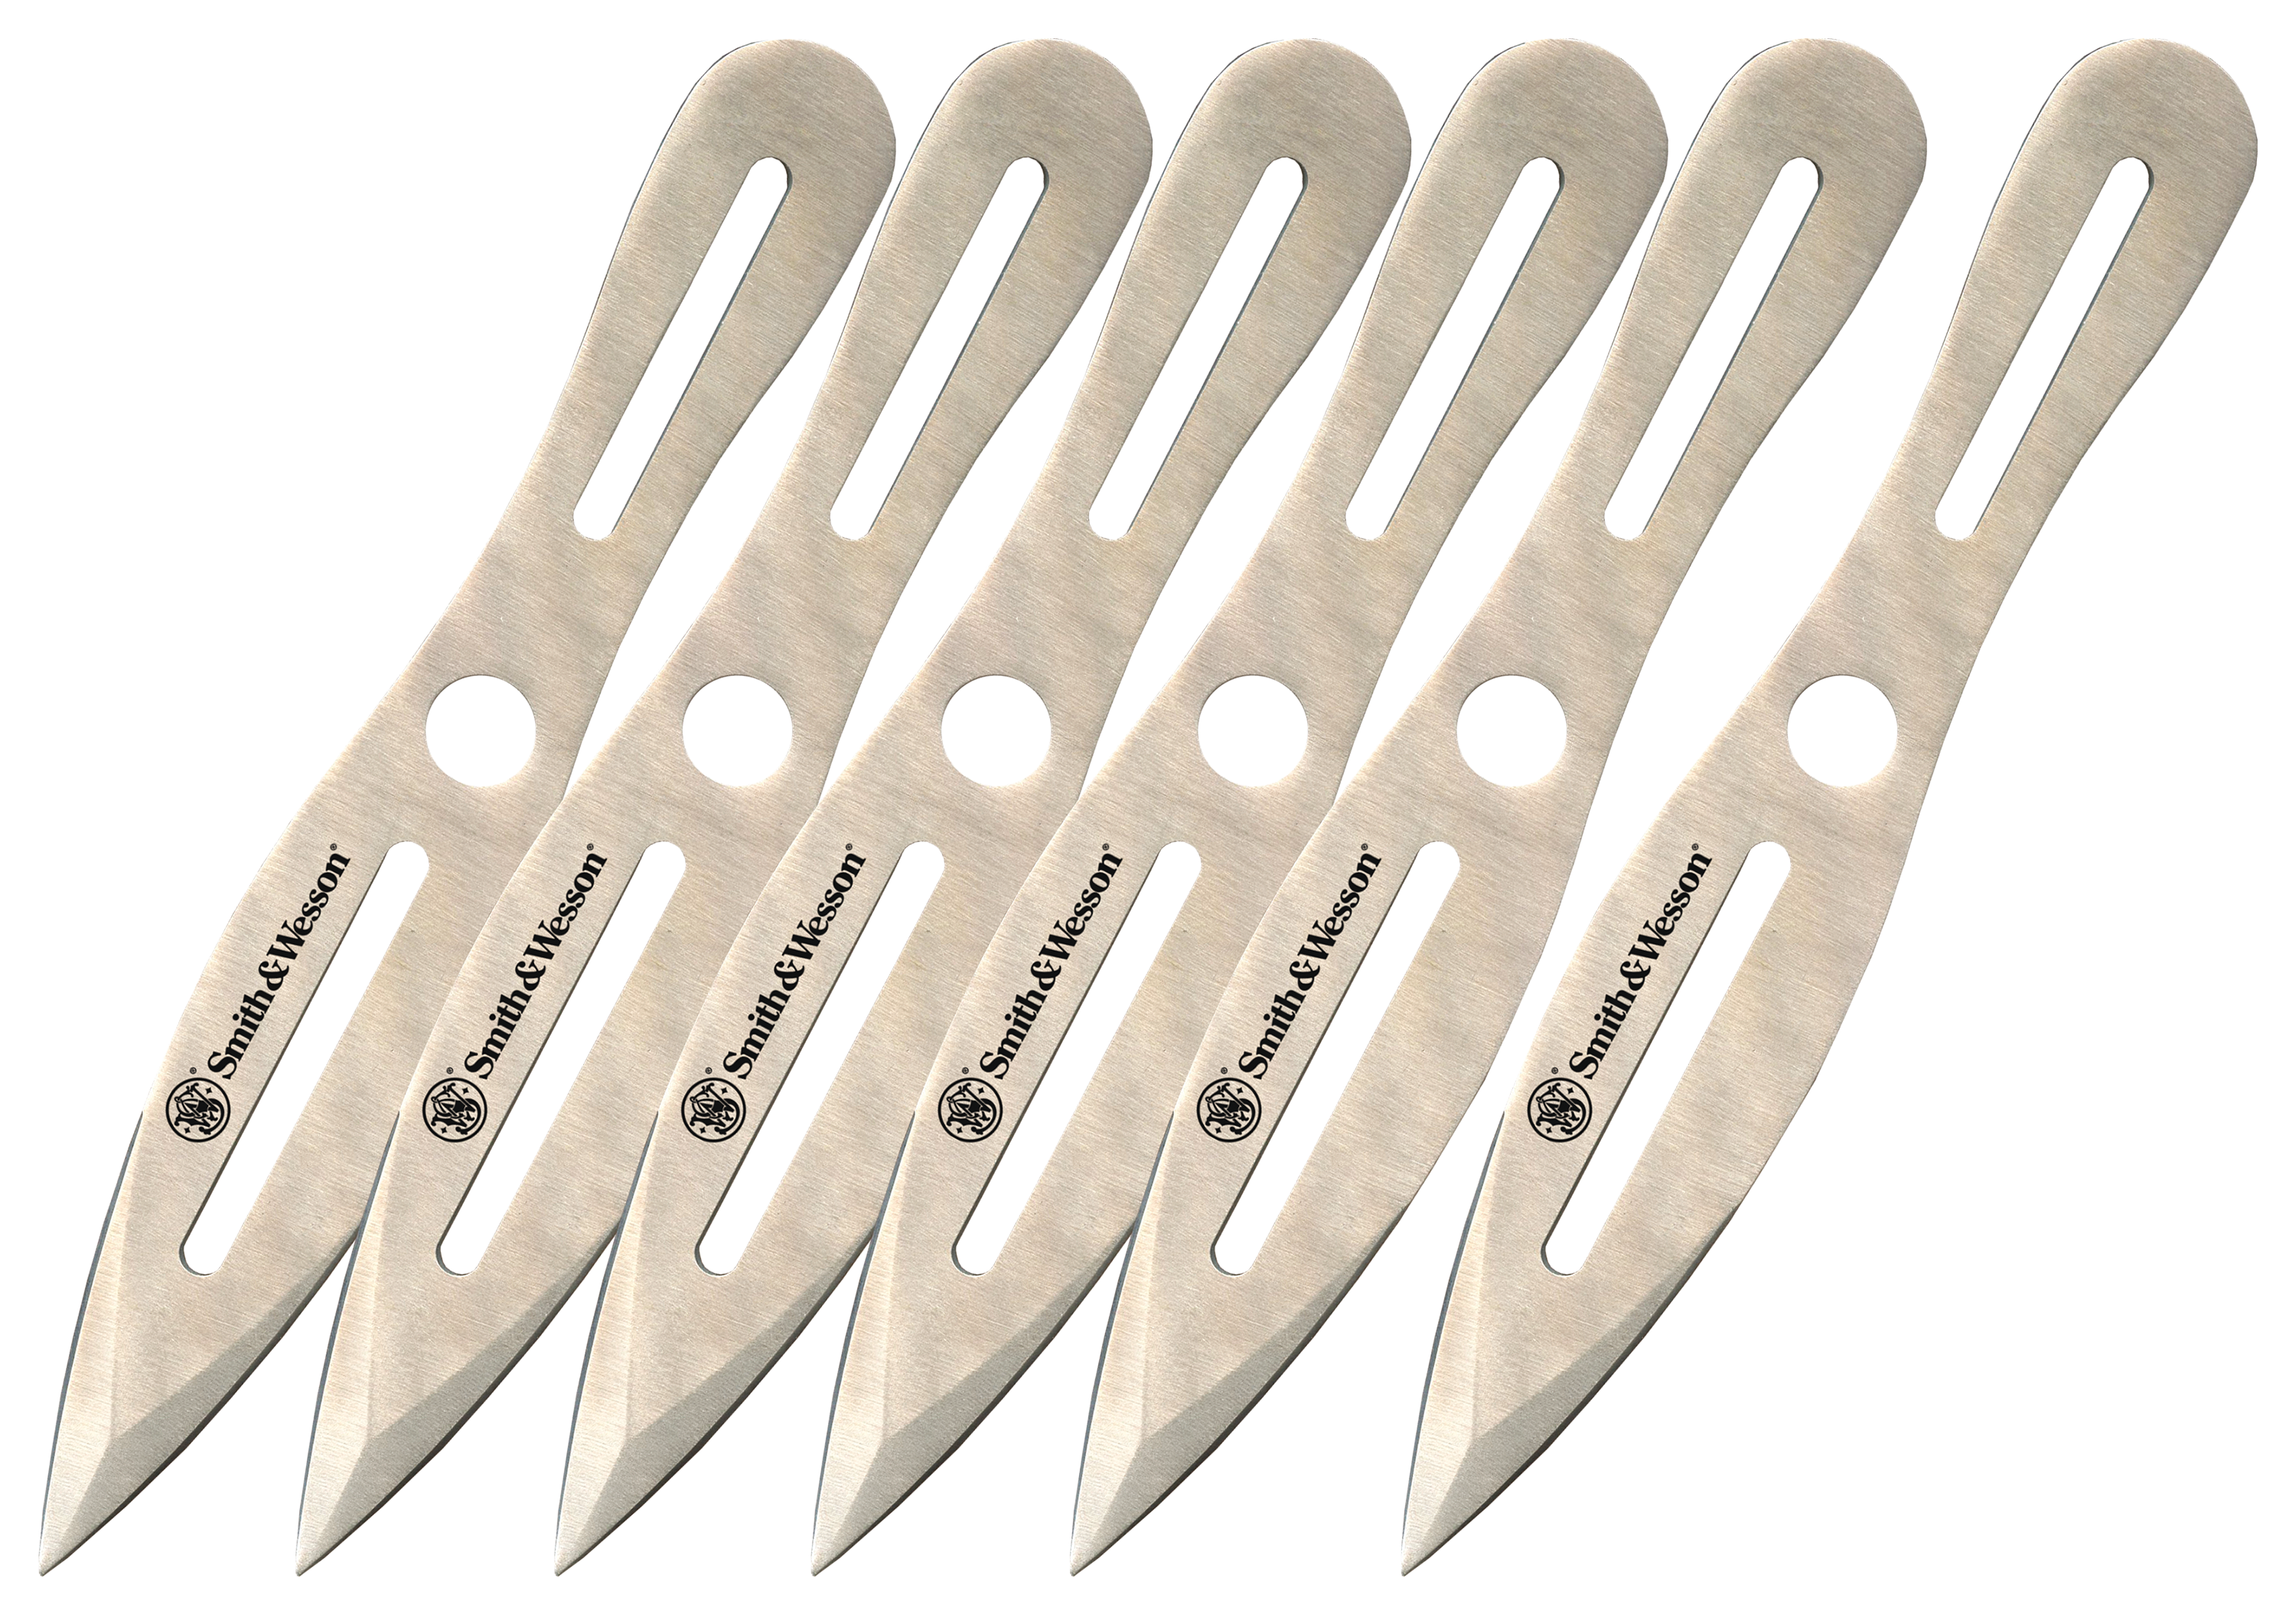 Smith &Wesson Bullseye Throwing Knife Set - 8' - 6-Pack